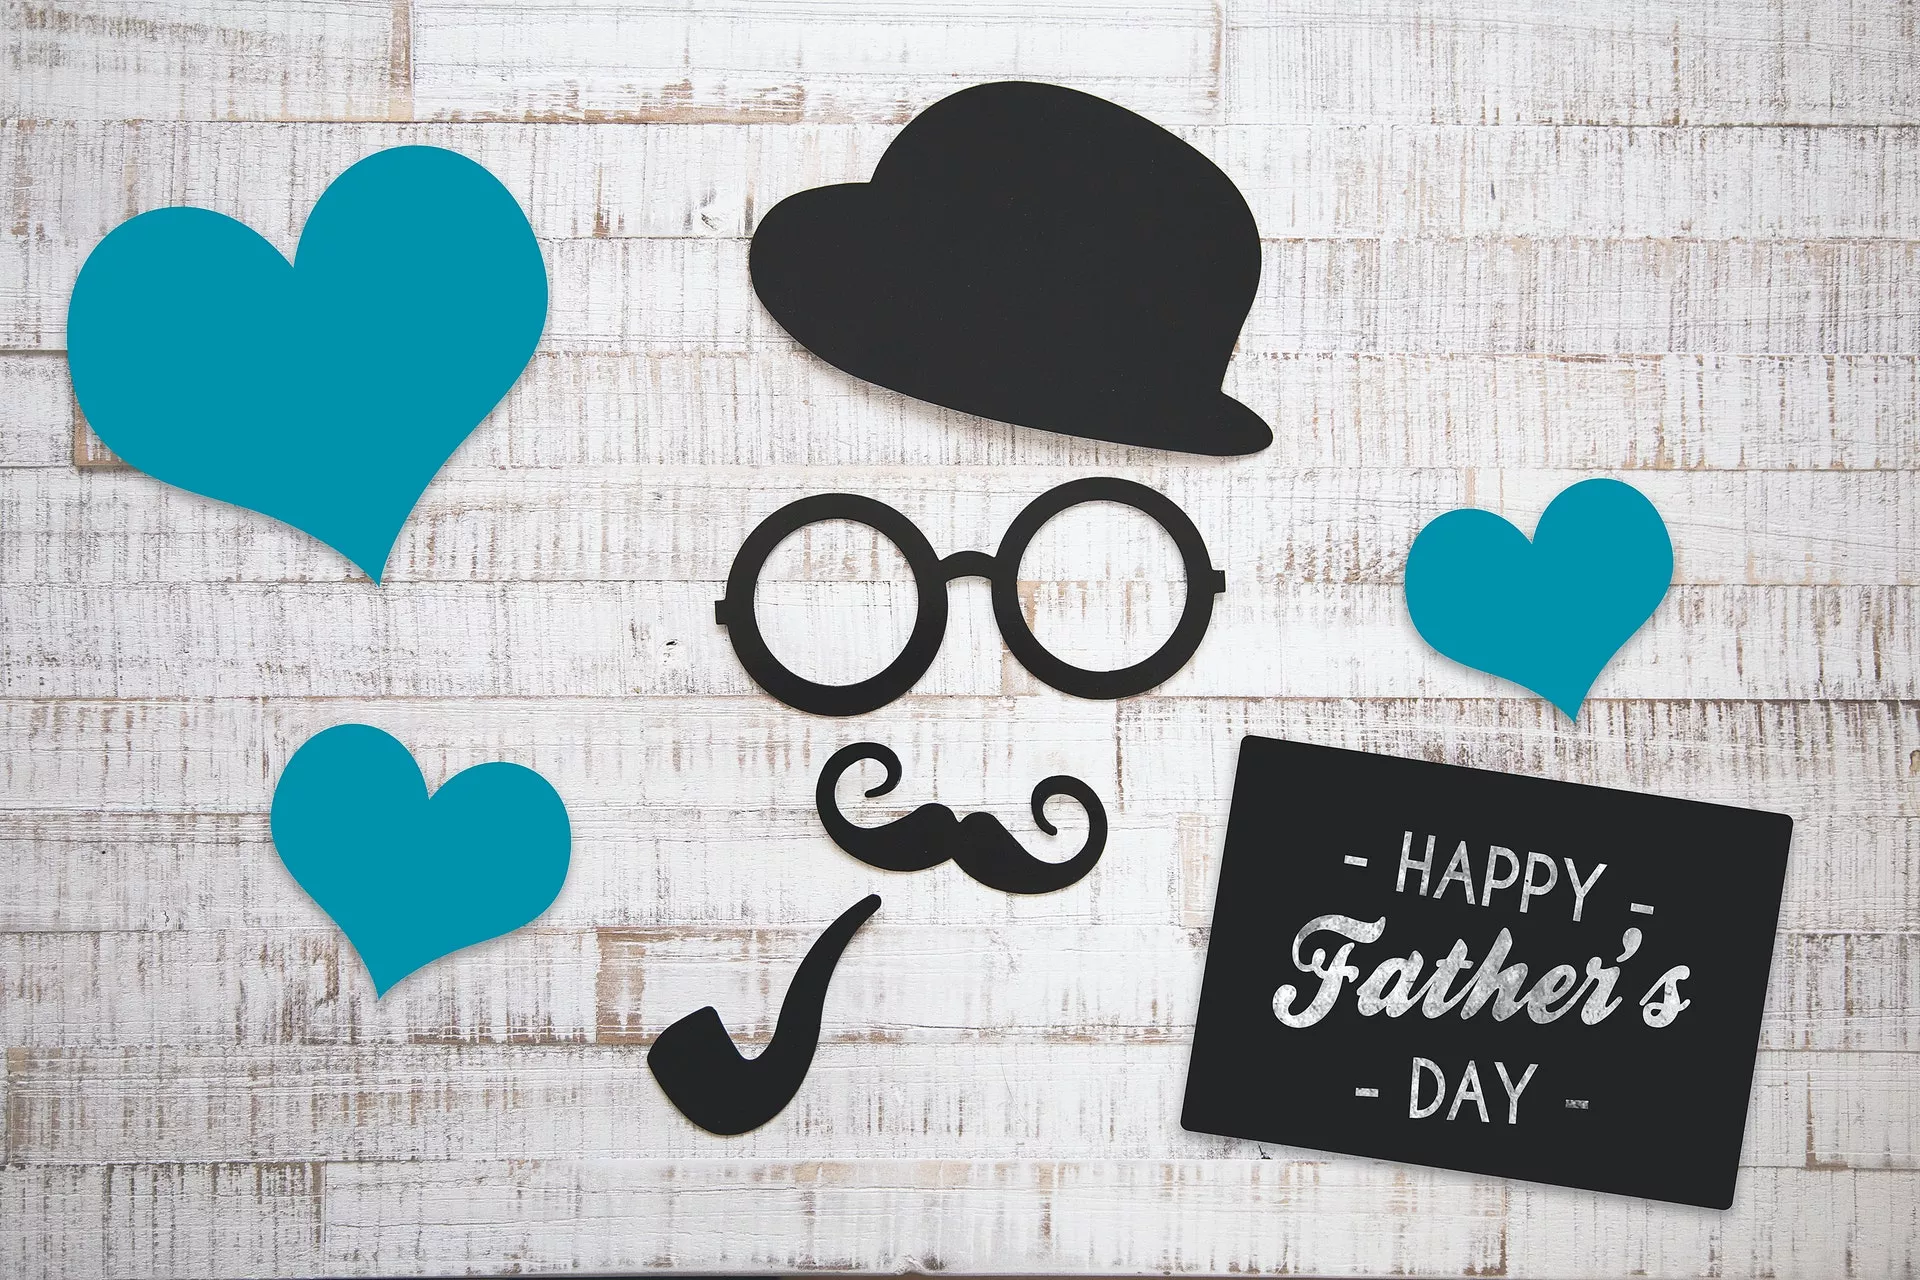 Happy Father's Day: themed pictures / Photo: pexels